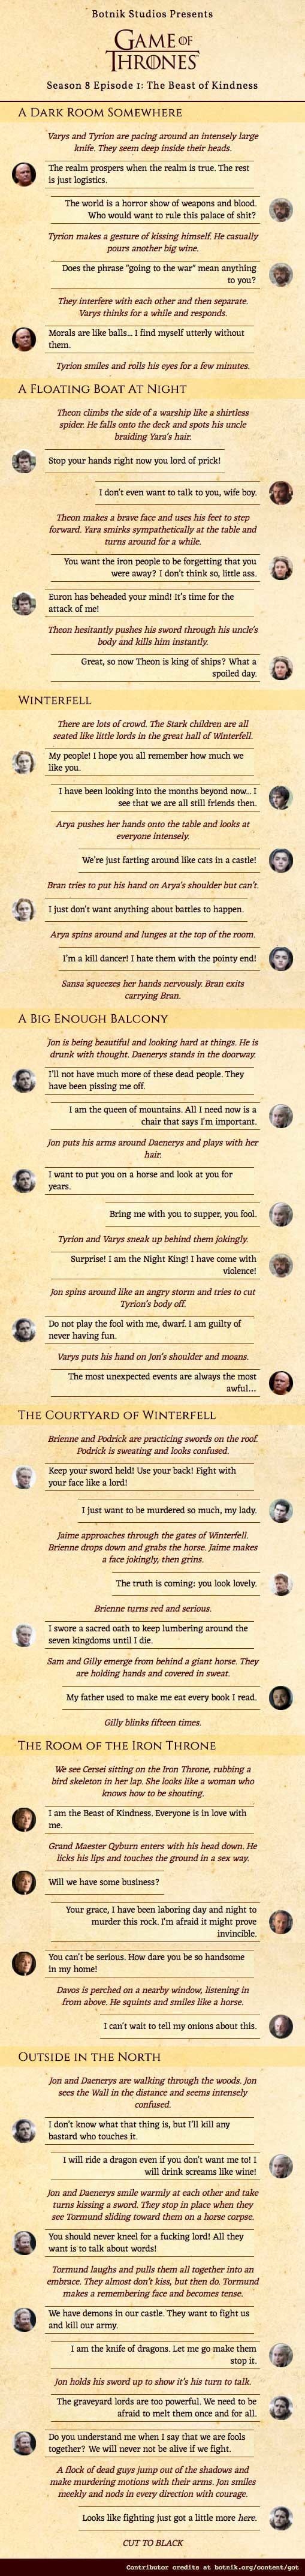 Computer Program Writes A Hilarious Script For Game Of Thrones